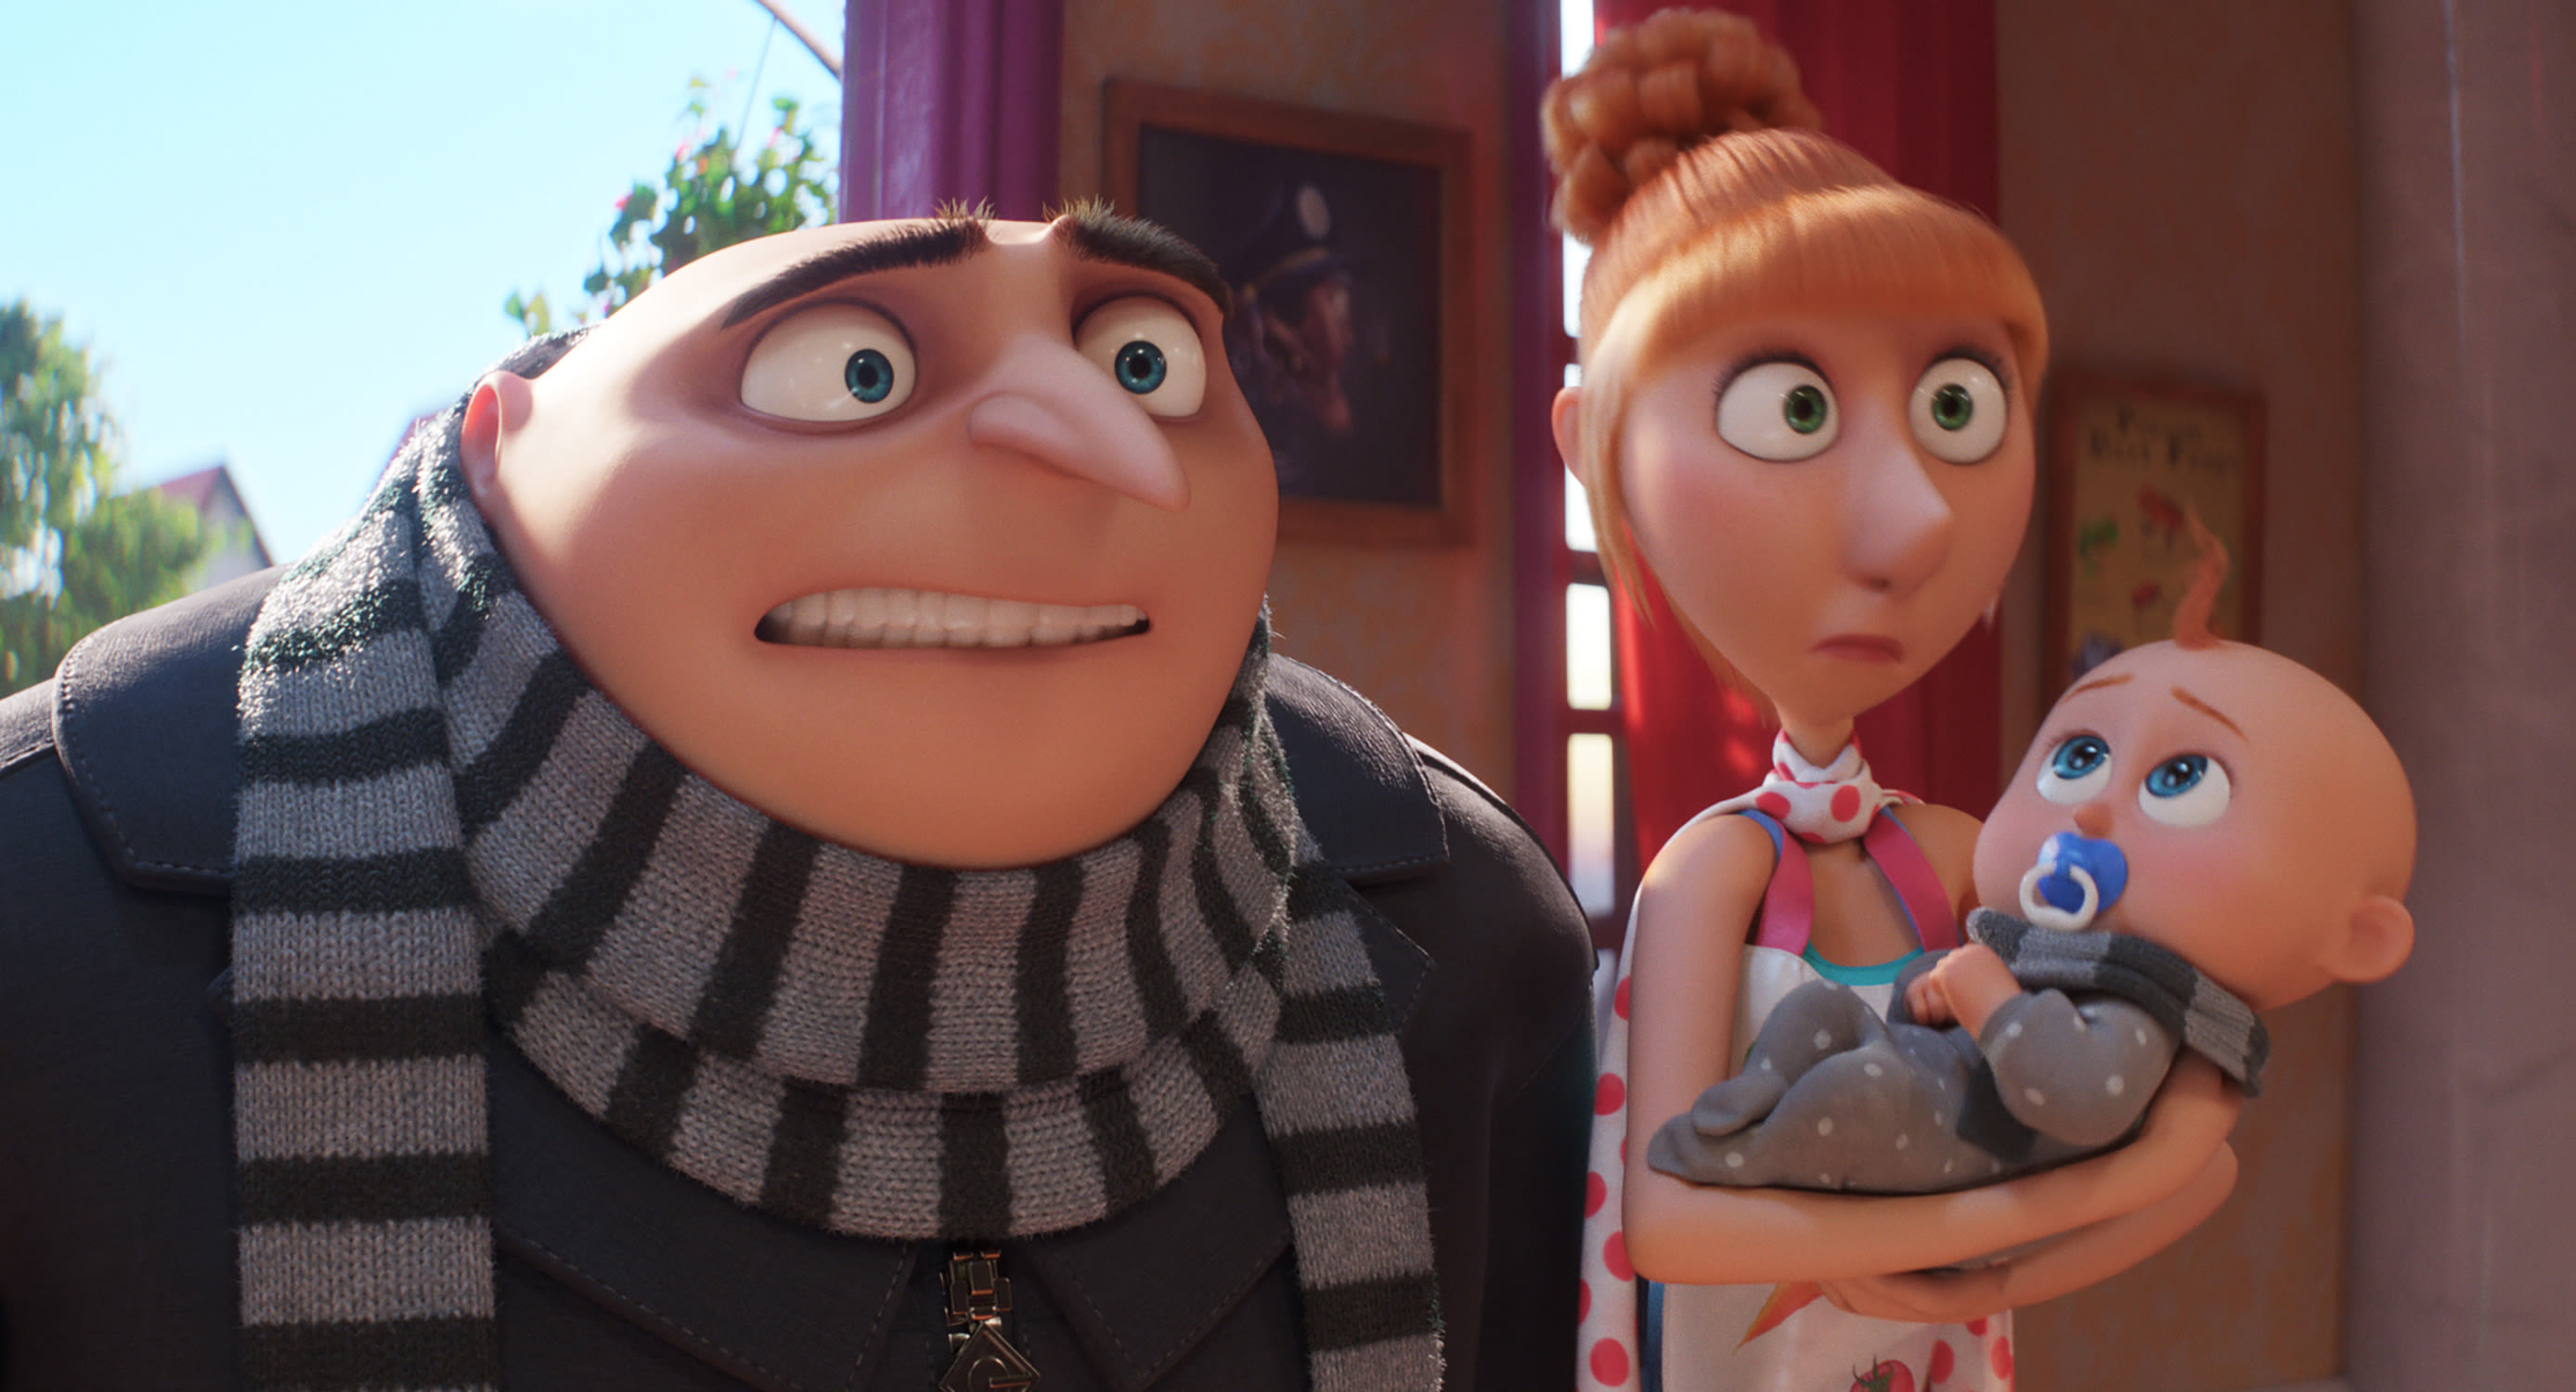 Review | ‘Despicable Me 4’: A wildly imaginative yet overly plotty adventure